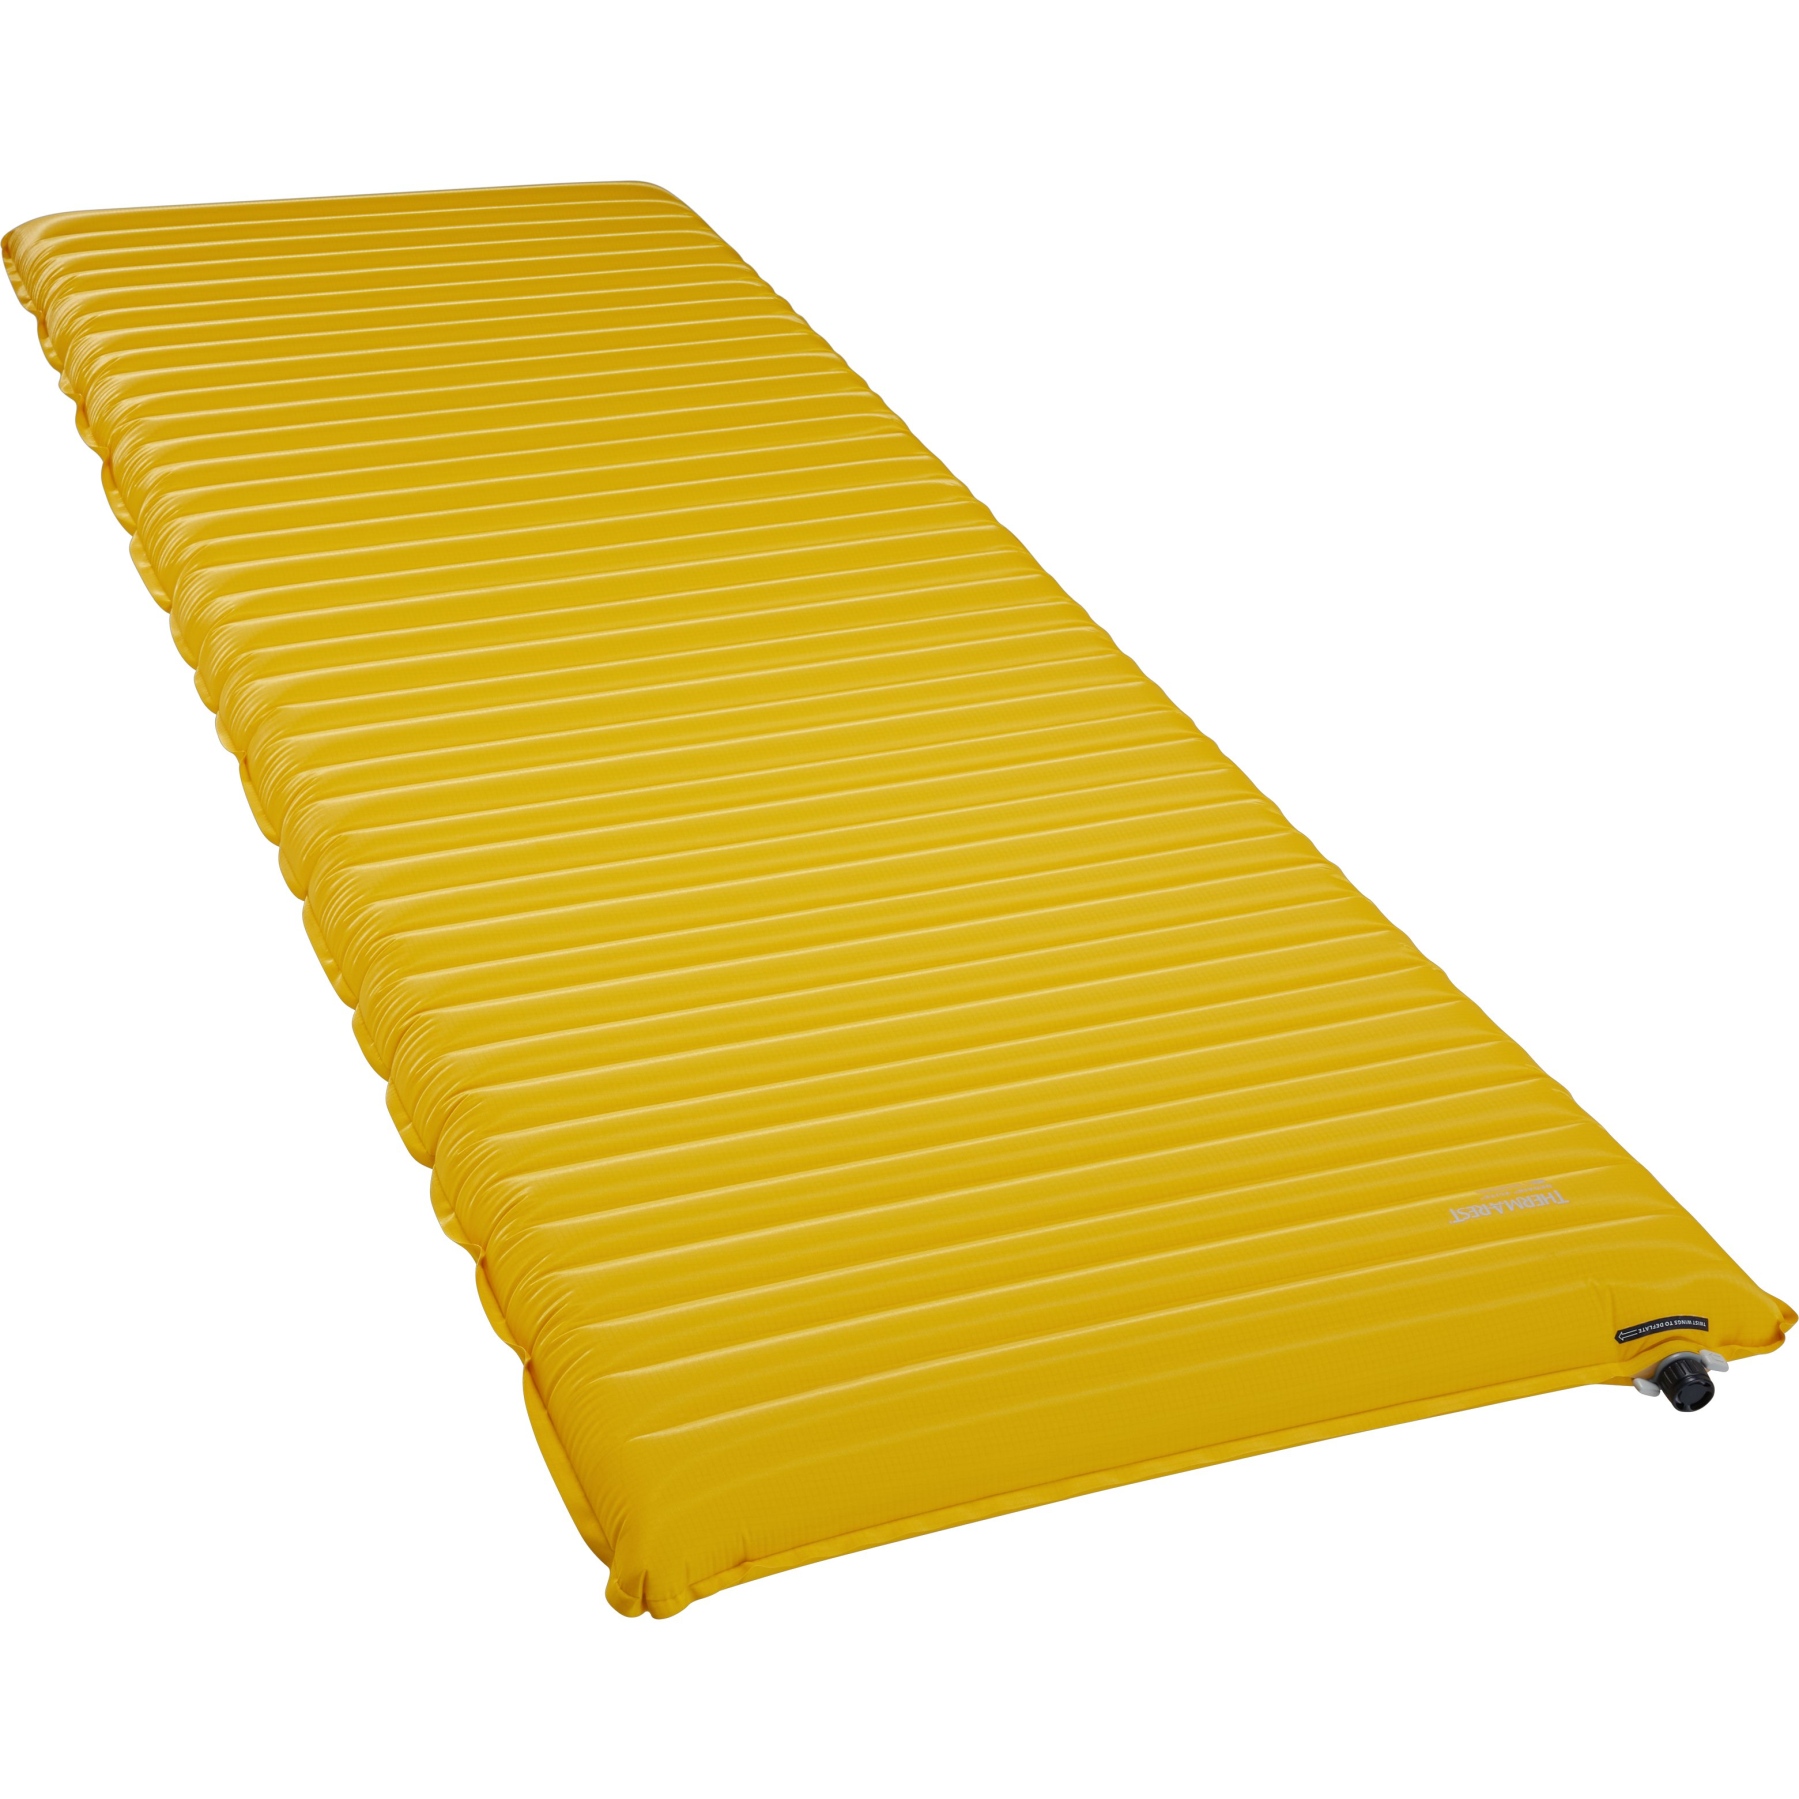 Picture of Therm-a-Rest NeoAir Xlite NXT MAX Sleeping Pad - Large - Solar Flare